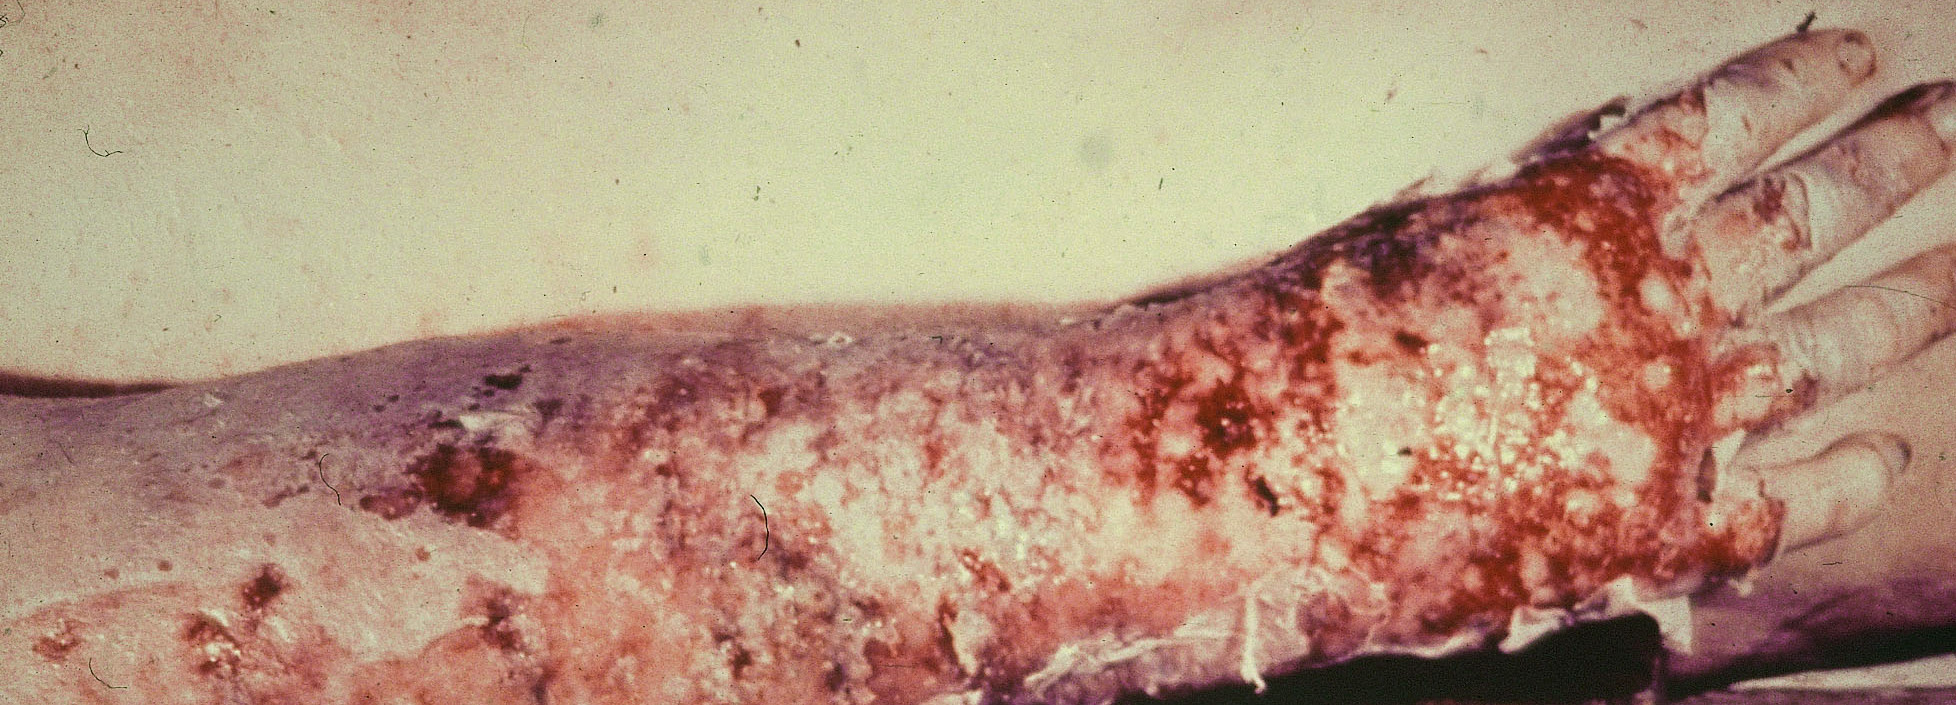 glanders: Human, skin. There is extensive ulceration and sloughing of the skin of the forearm and hand; the underlying tissues are edematous and hemorrhagic. Ulcers may be connected by lymphatic vessels (“Farcy pipes”) full of thick purulent exudate.